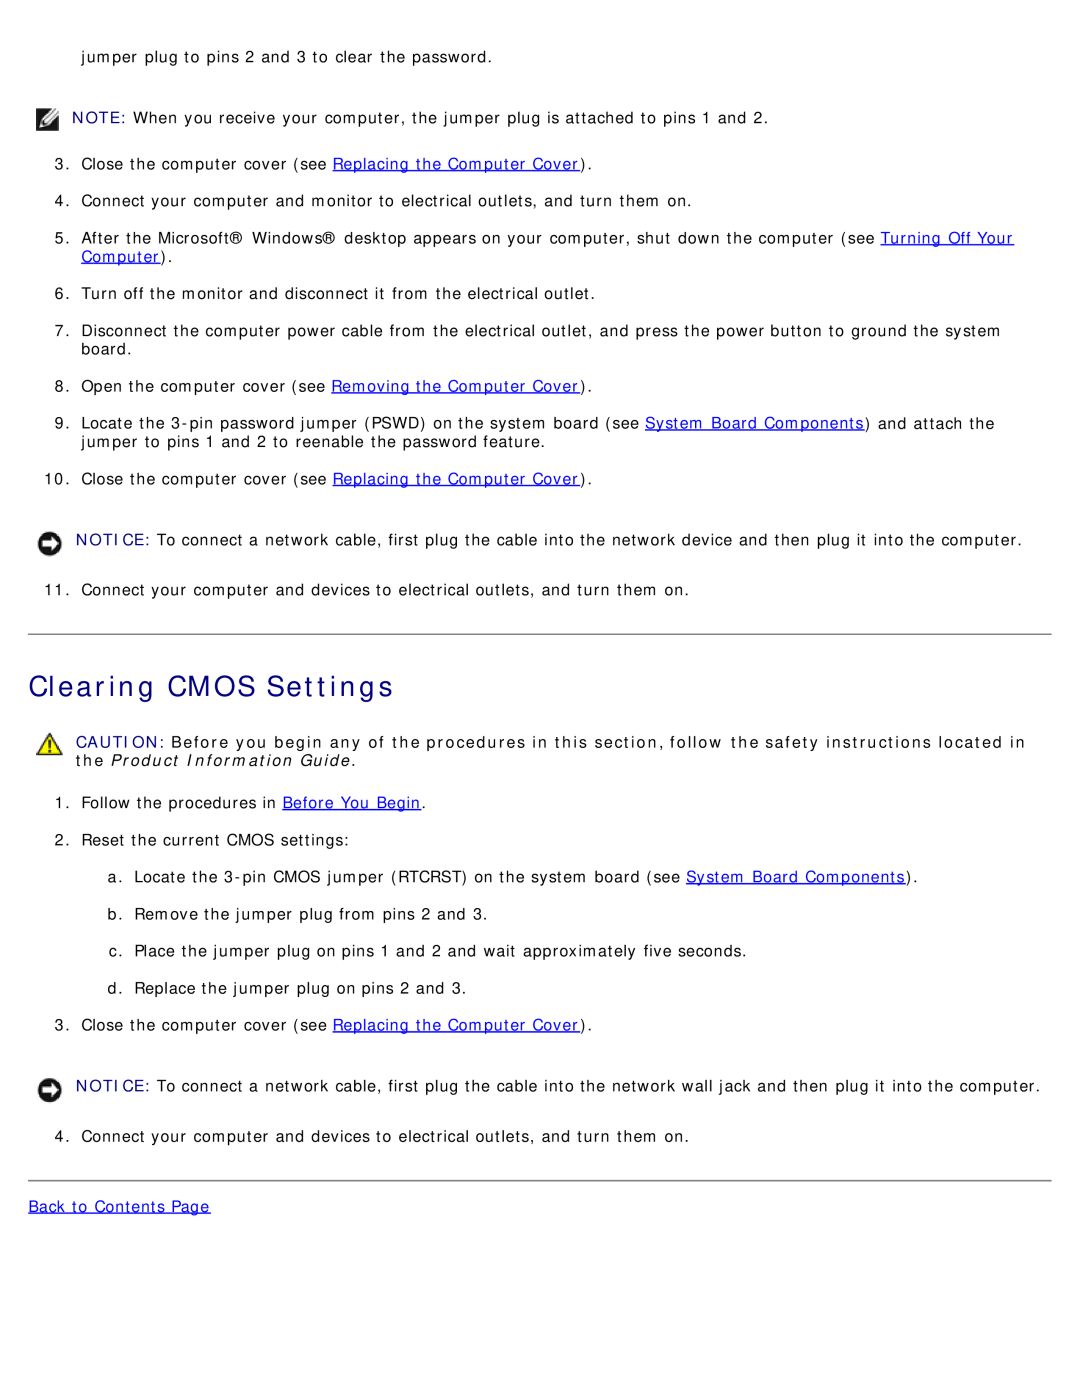 Dell DCSM manual Clearing CMOS Settings, Back to Contents Page 